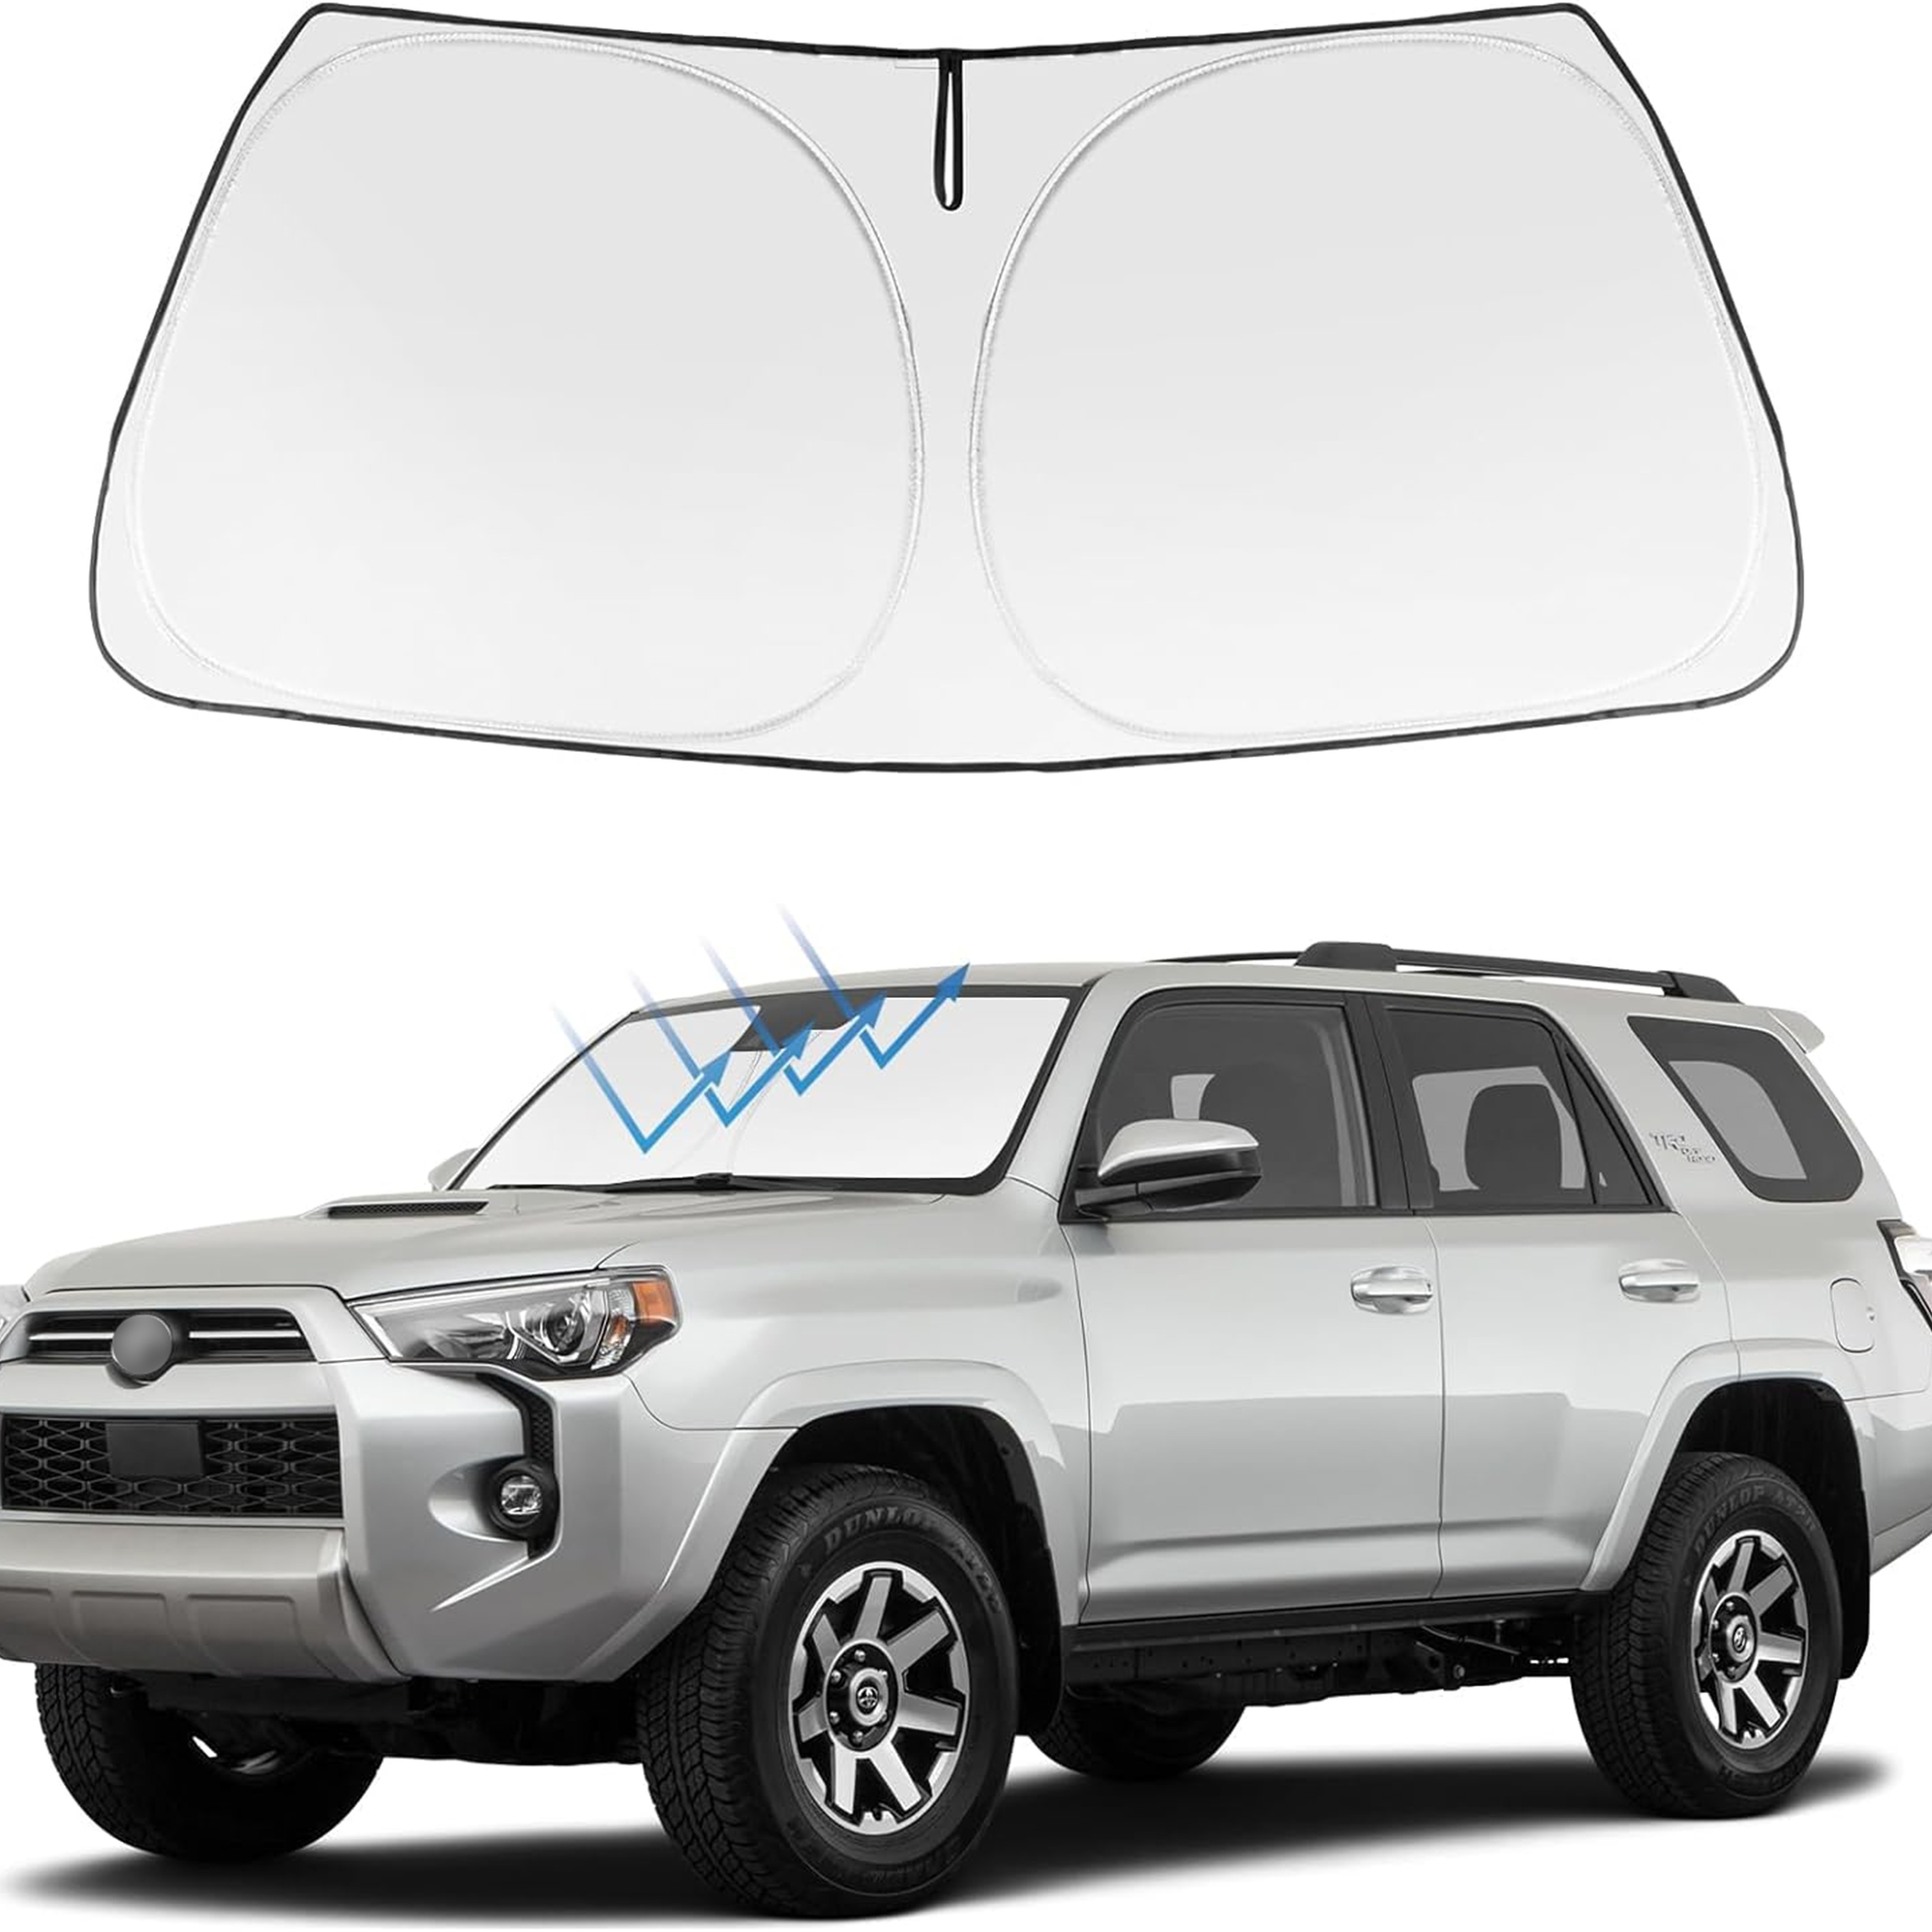 

2024 Car Windshield Sunshade, Foldable Sunshade, 99% Uv Heat Reflector, Keeps Truck, Suv Interior Cool, With Mirrors Cut-out Design